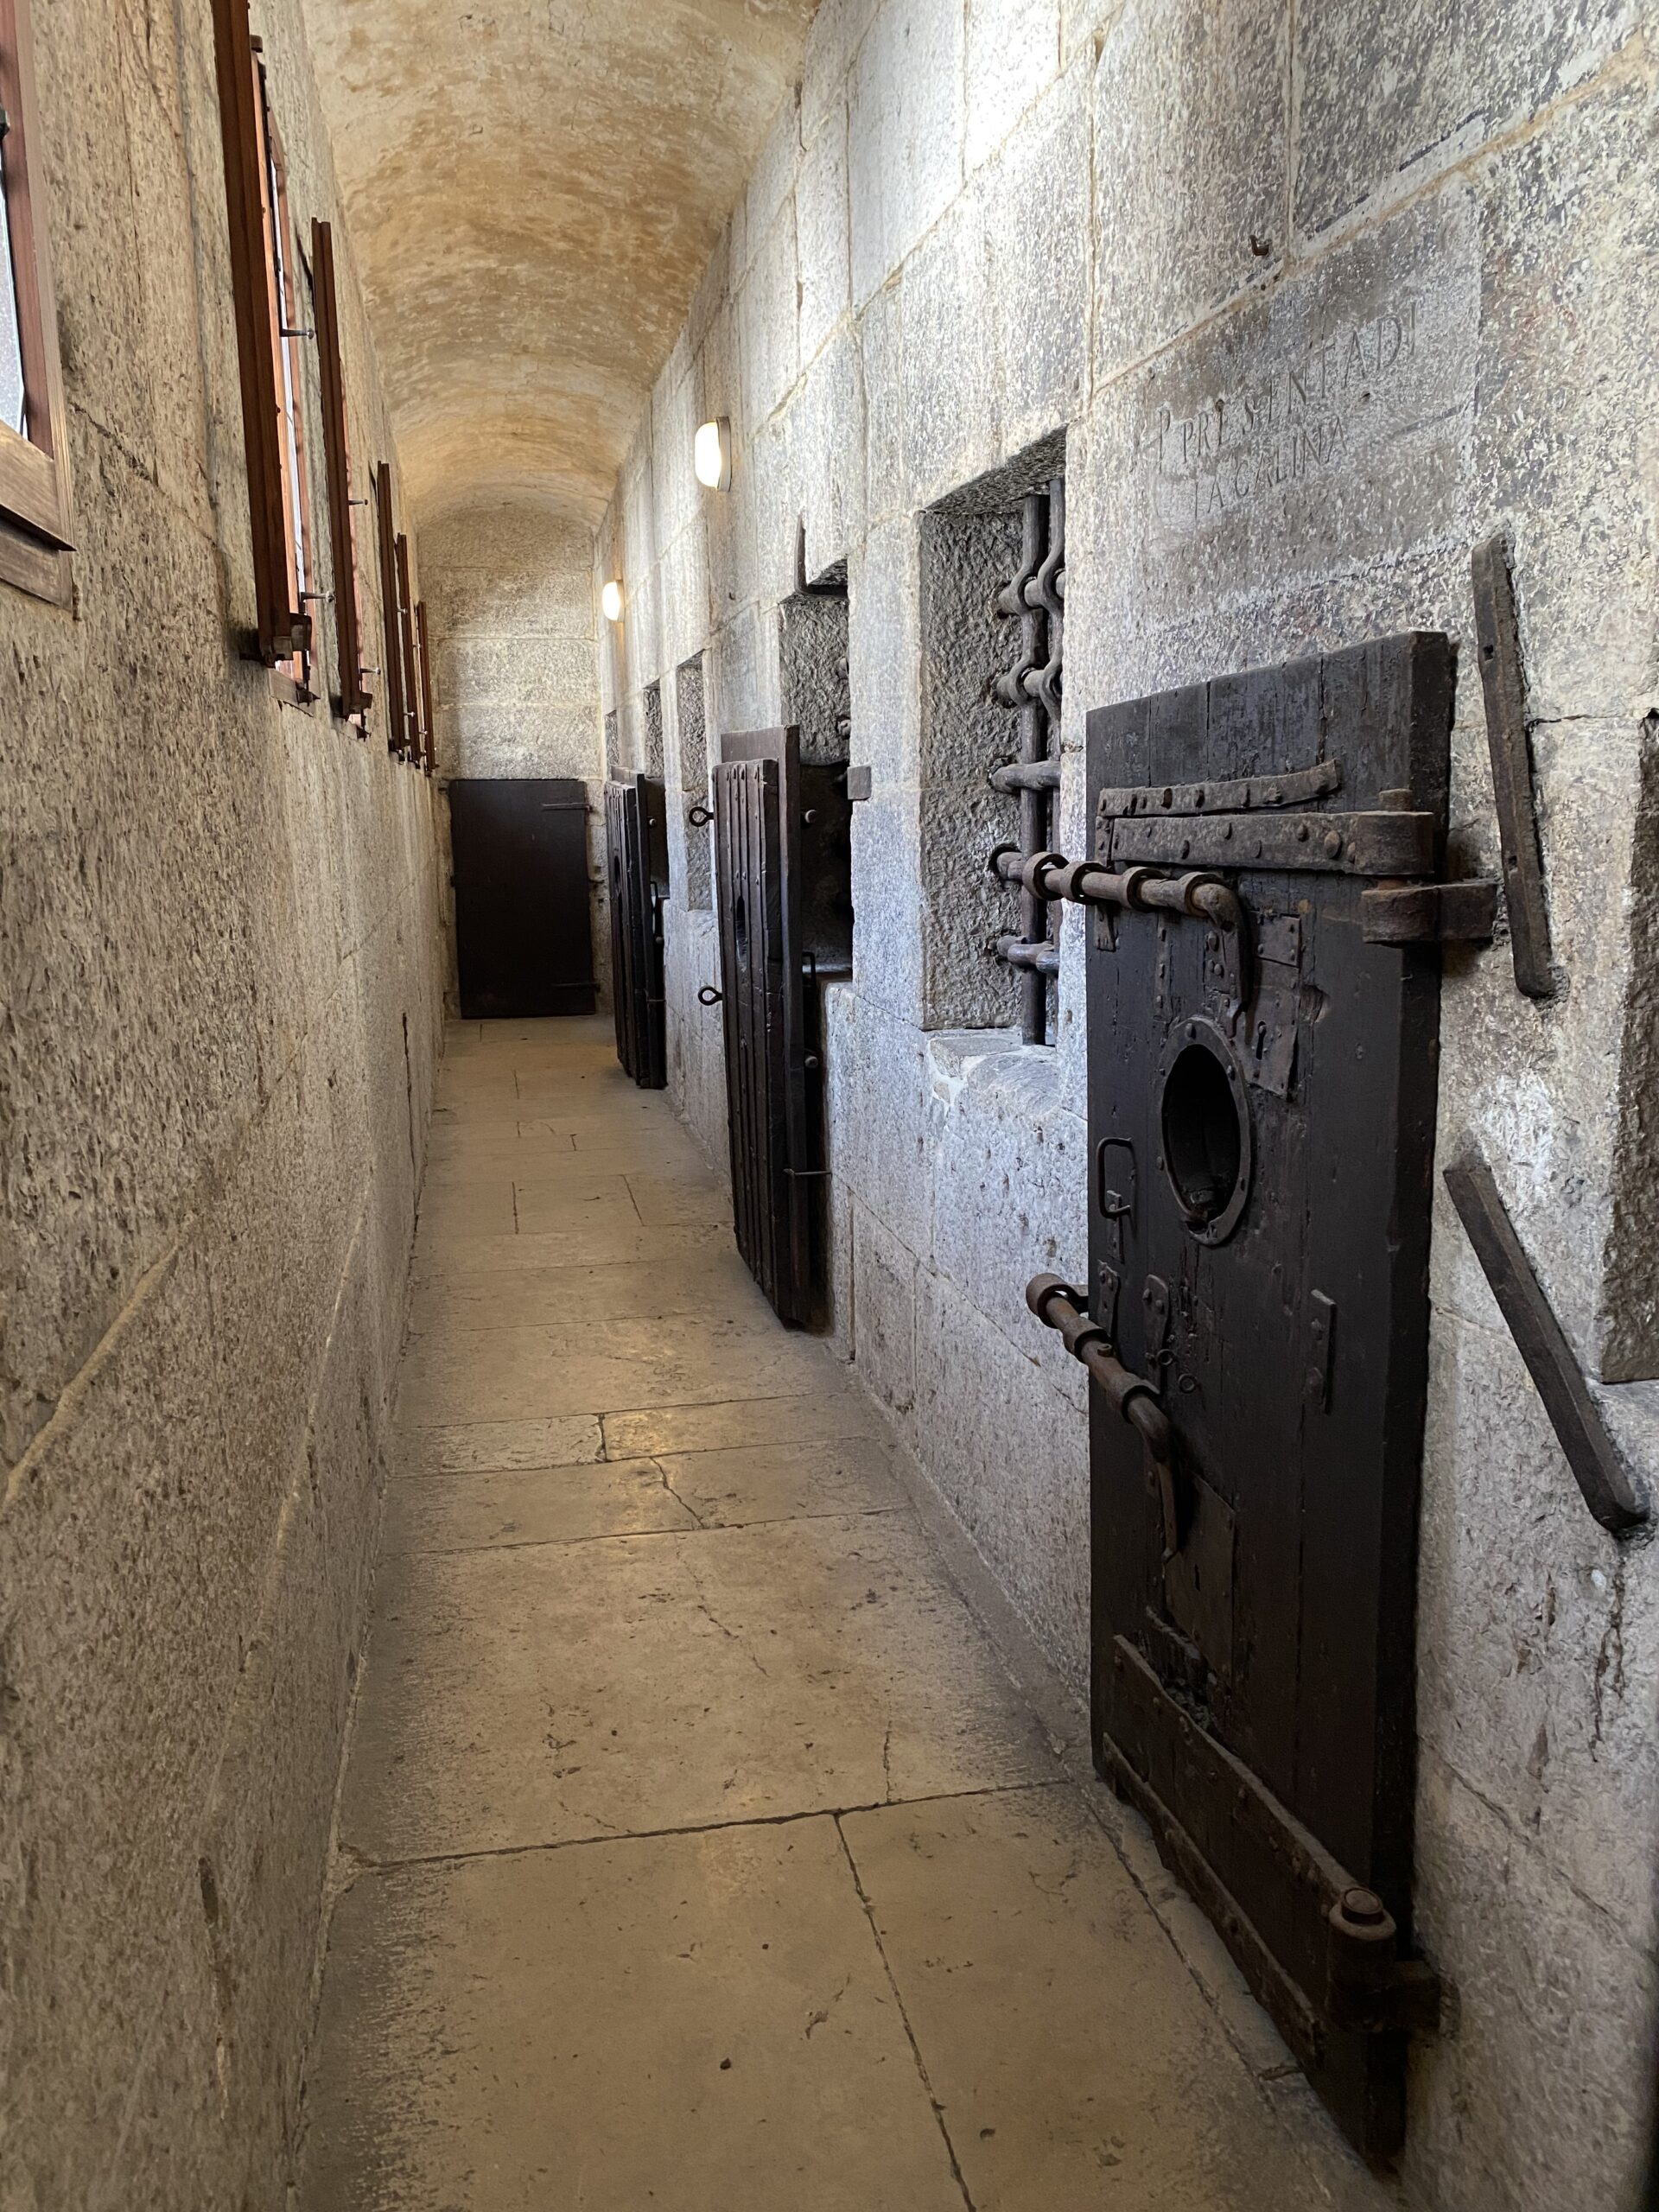 Cell block in Venice Italy's Doge's Palace